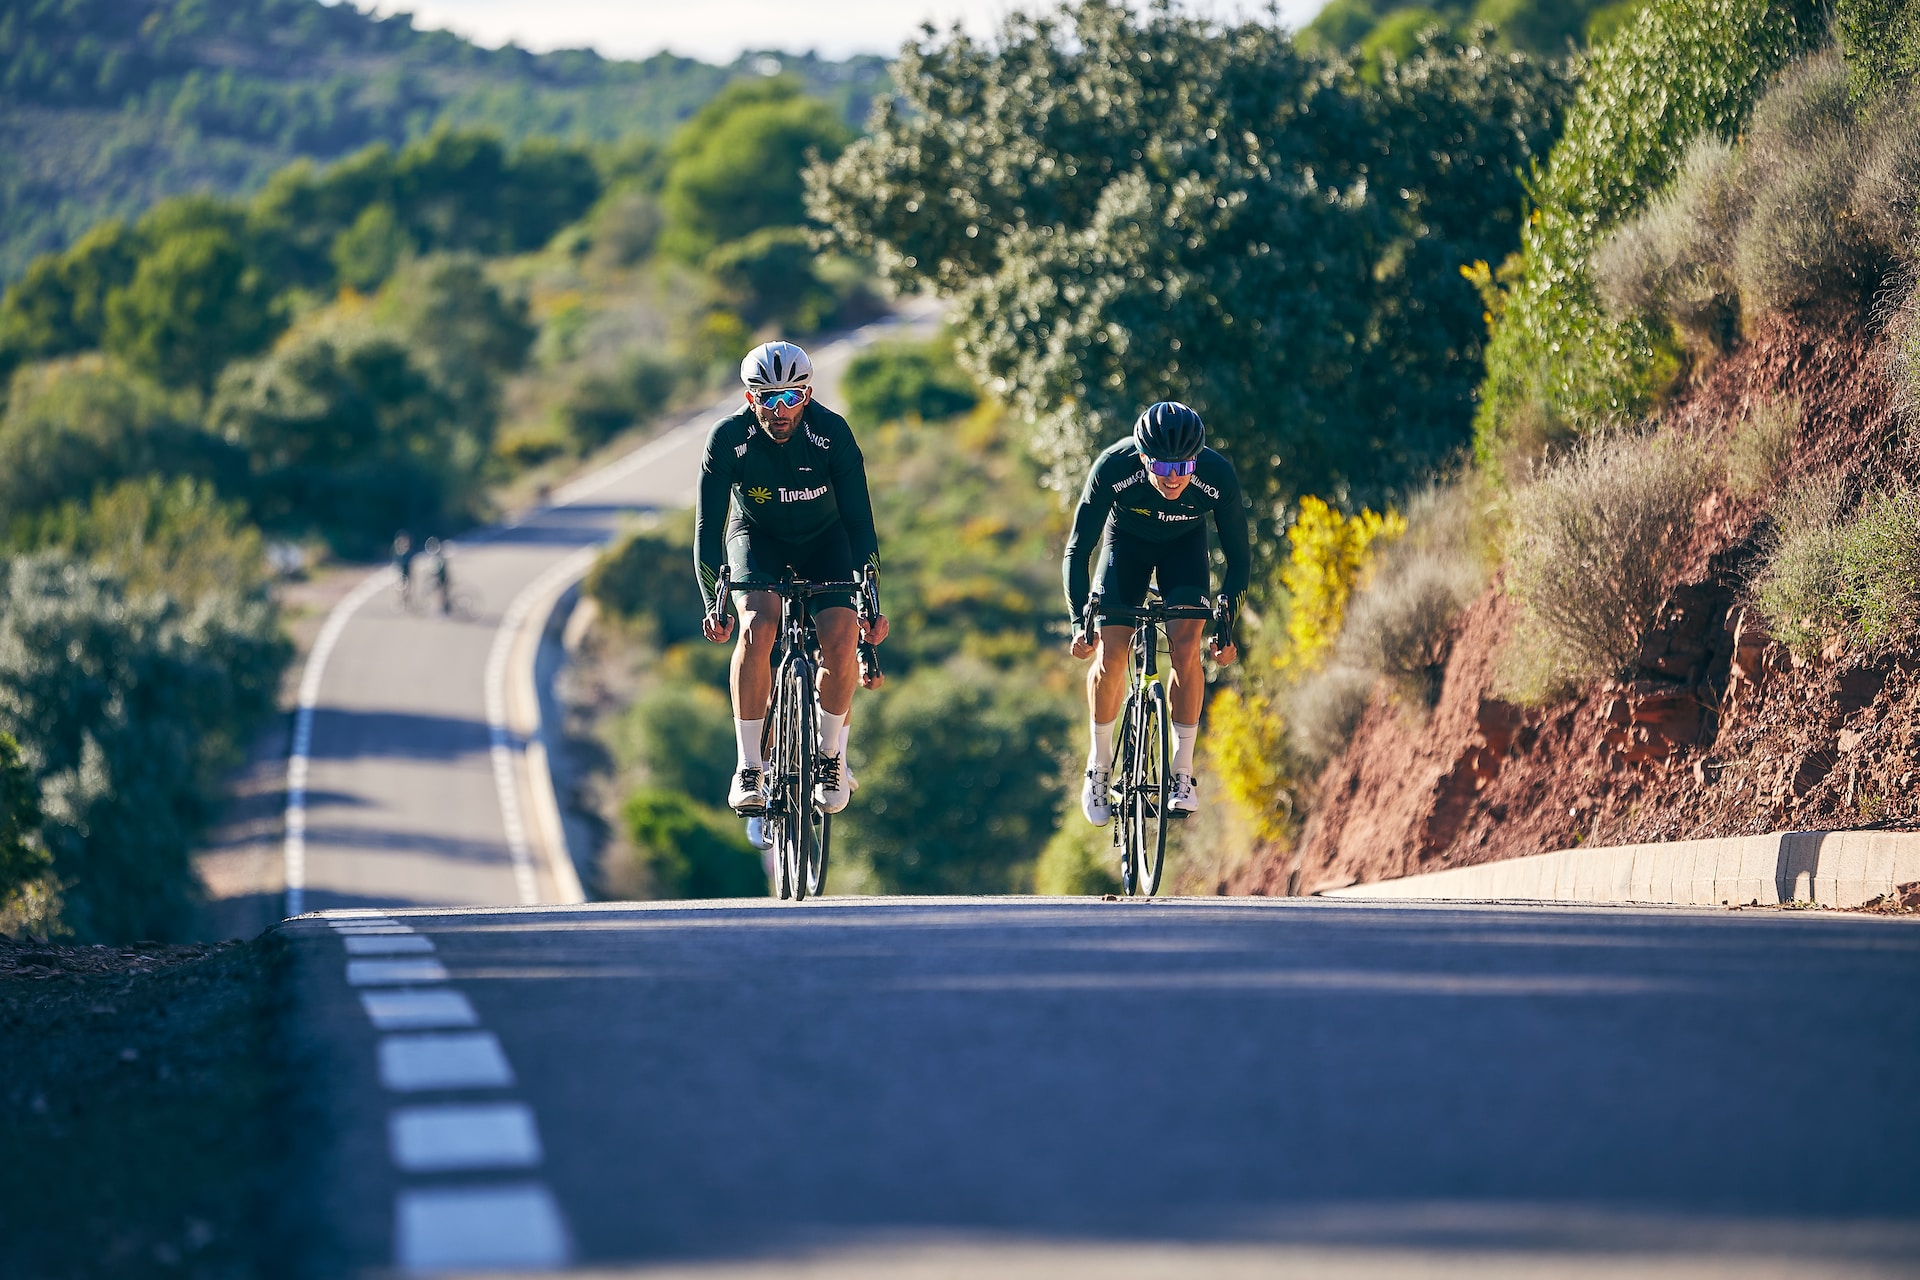 the image shows two professional athletes doing a cycling triathlon